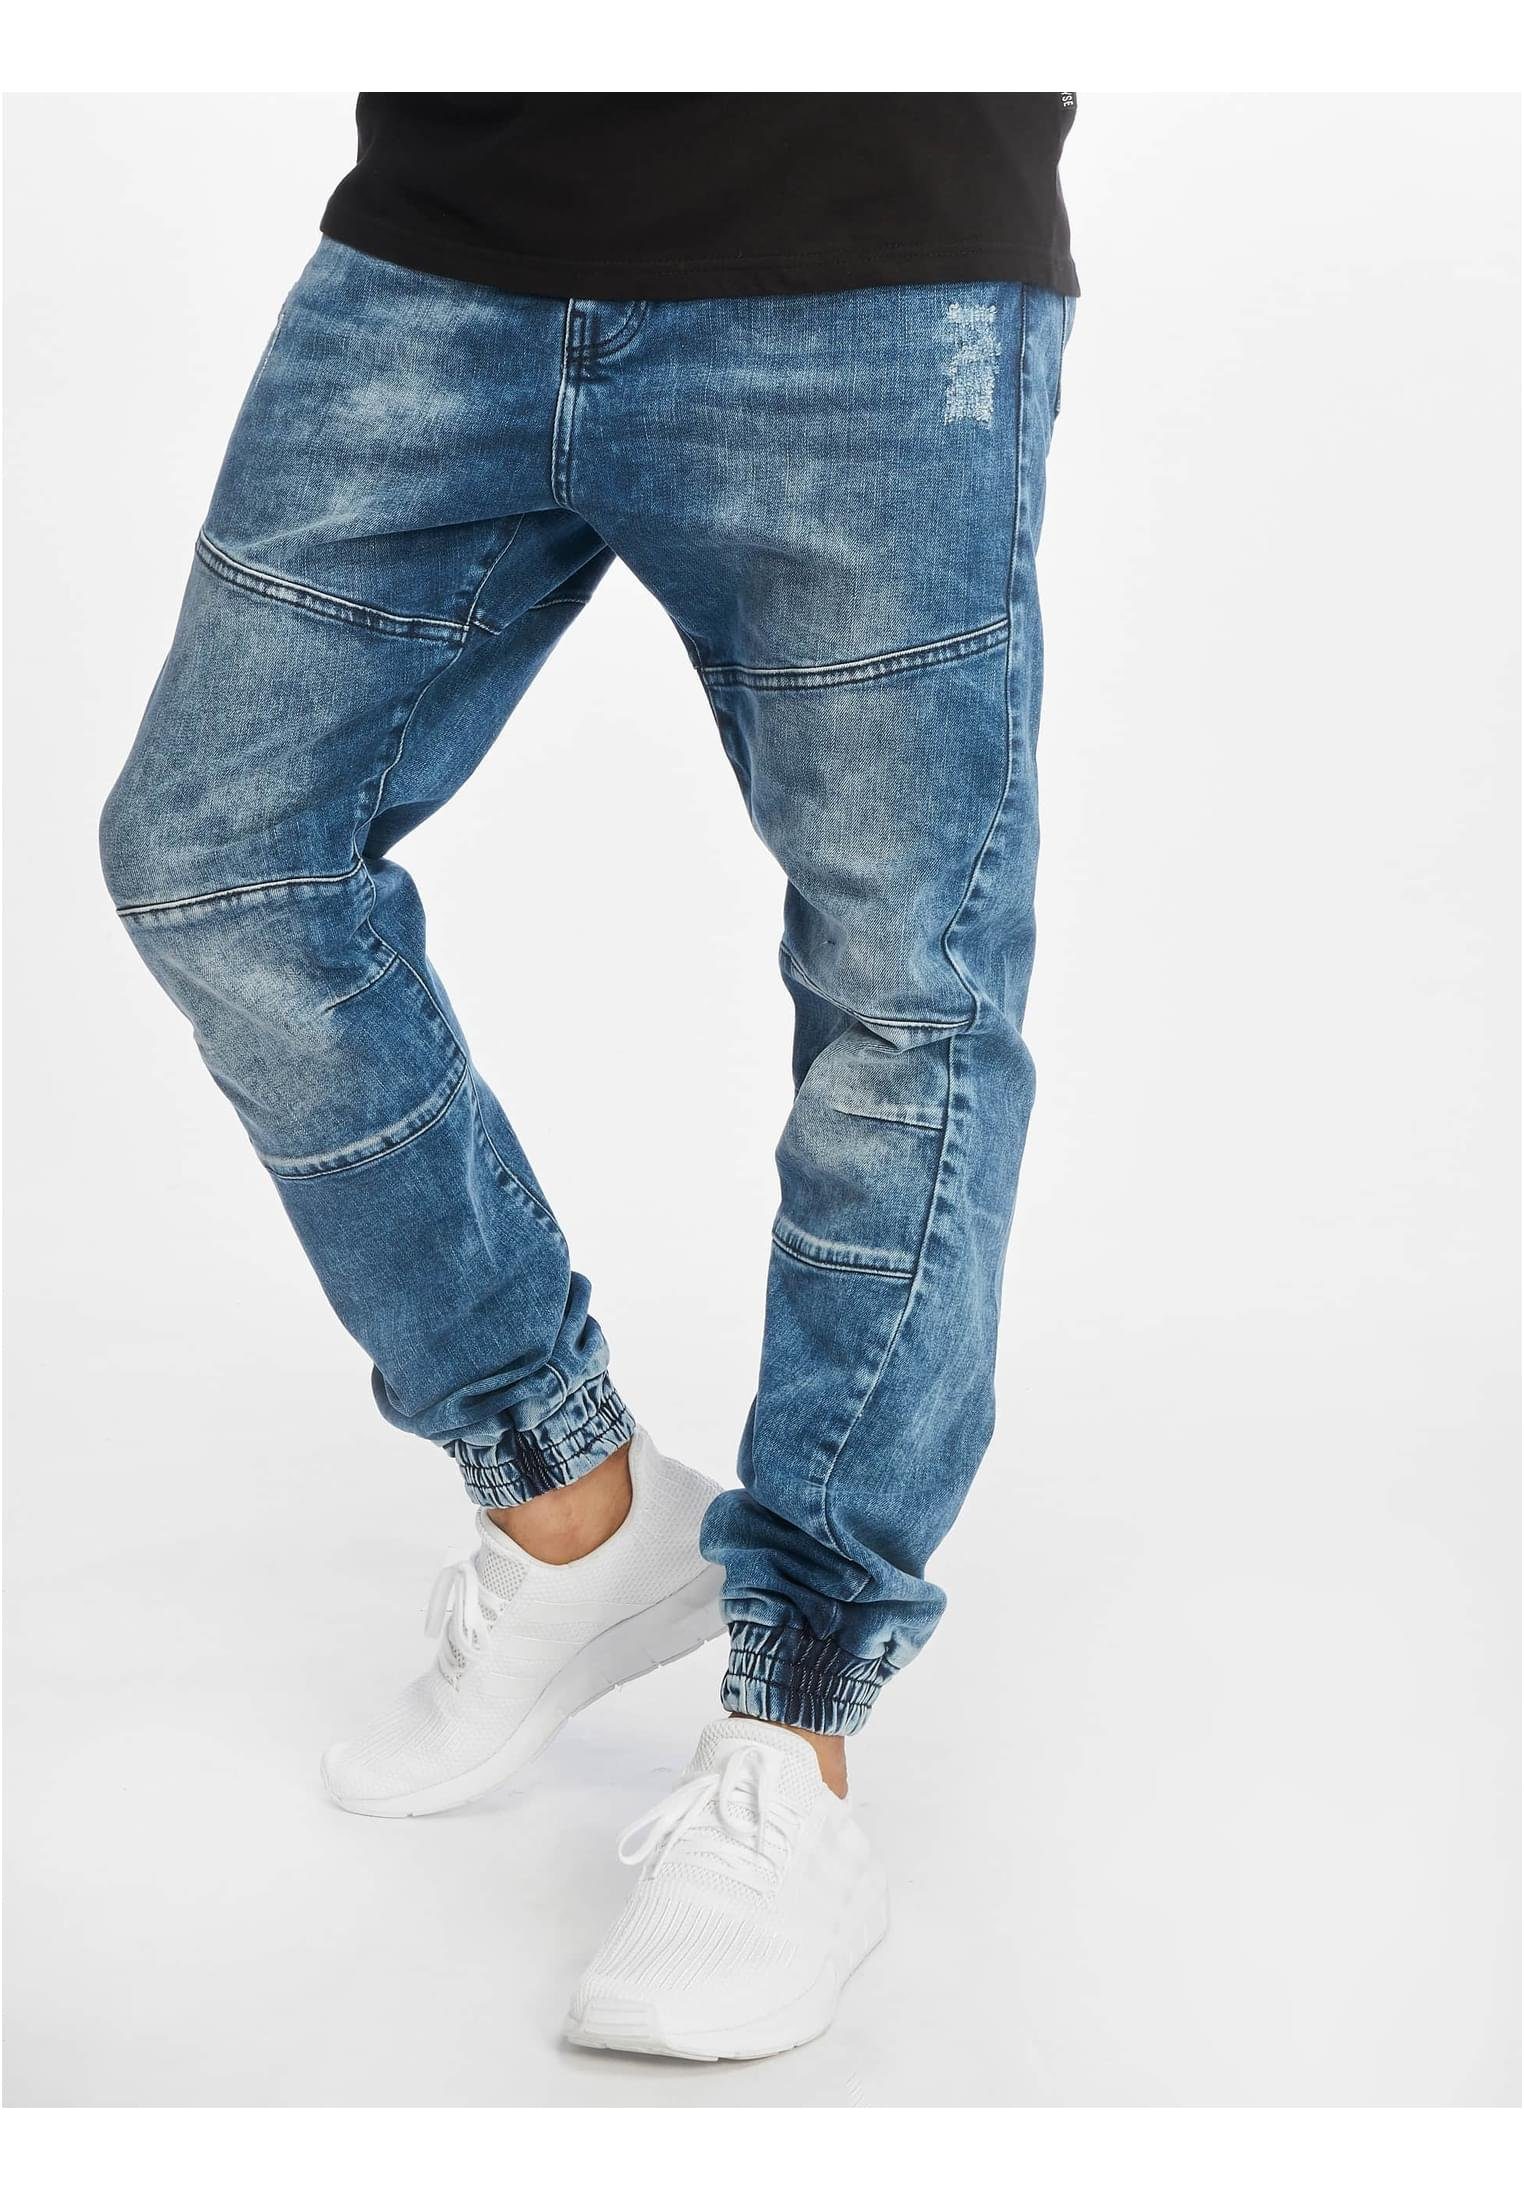 Just Rhyse Bequeme Jeans Herren Cool Straight Fit Jeans (1-tlg) denimblue